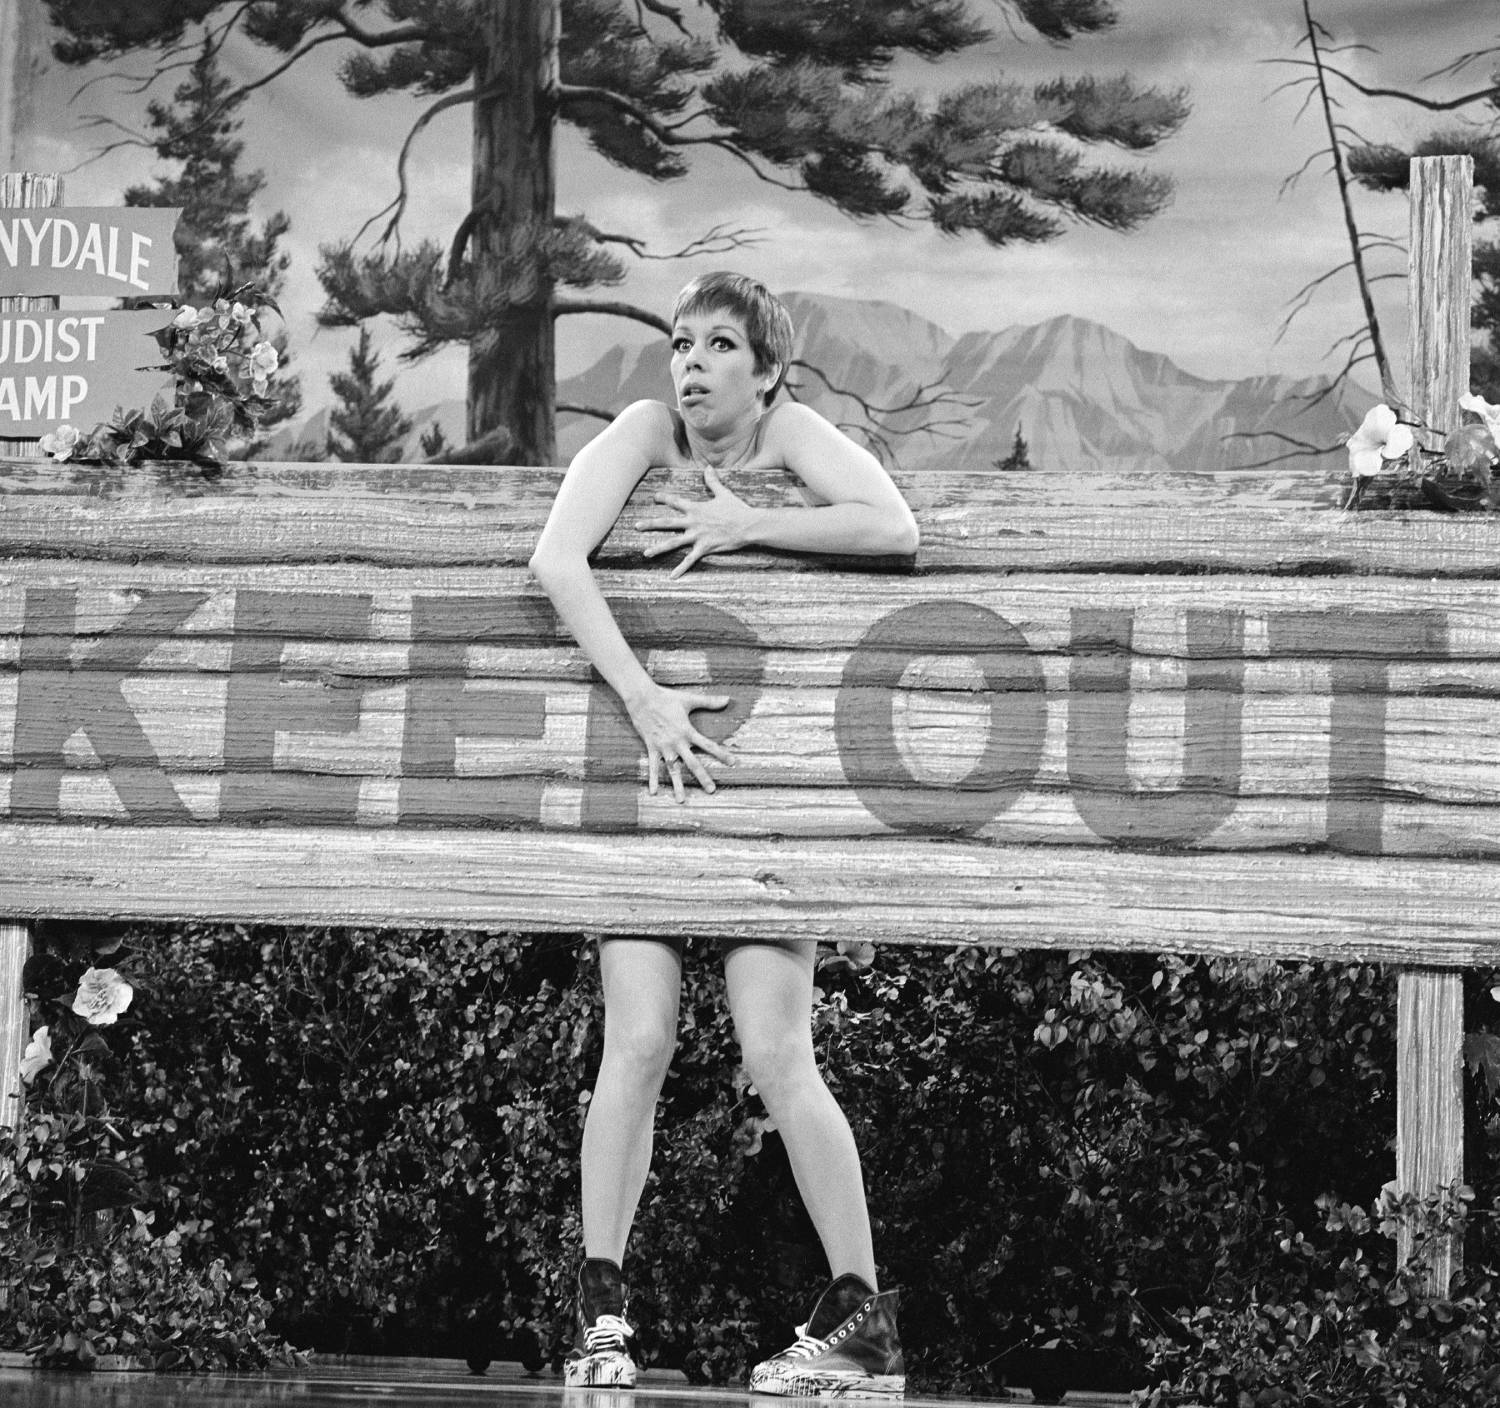 Seemingly naked, American comedienne and actress Carol Burnett hides behind a large wooden sign labelled 'Keep Out' during a skit on 'The Carol Burnett Show,' October 28, 1967.